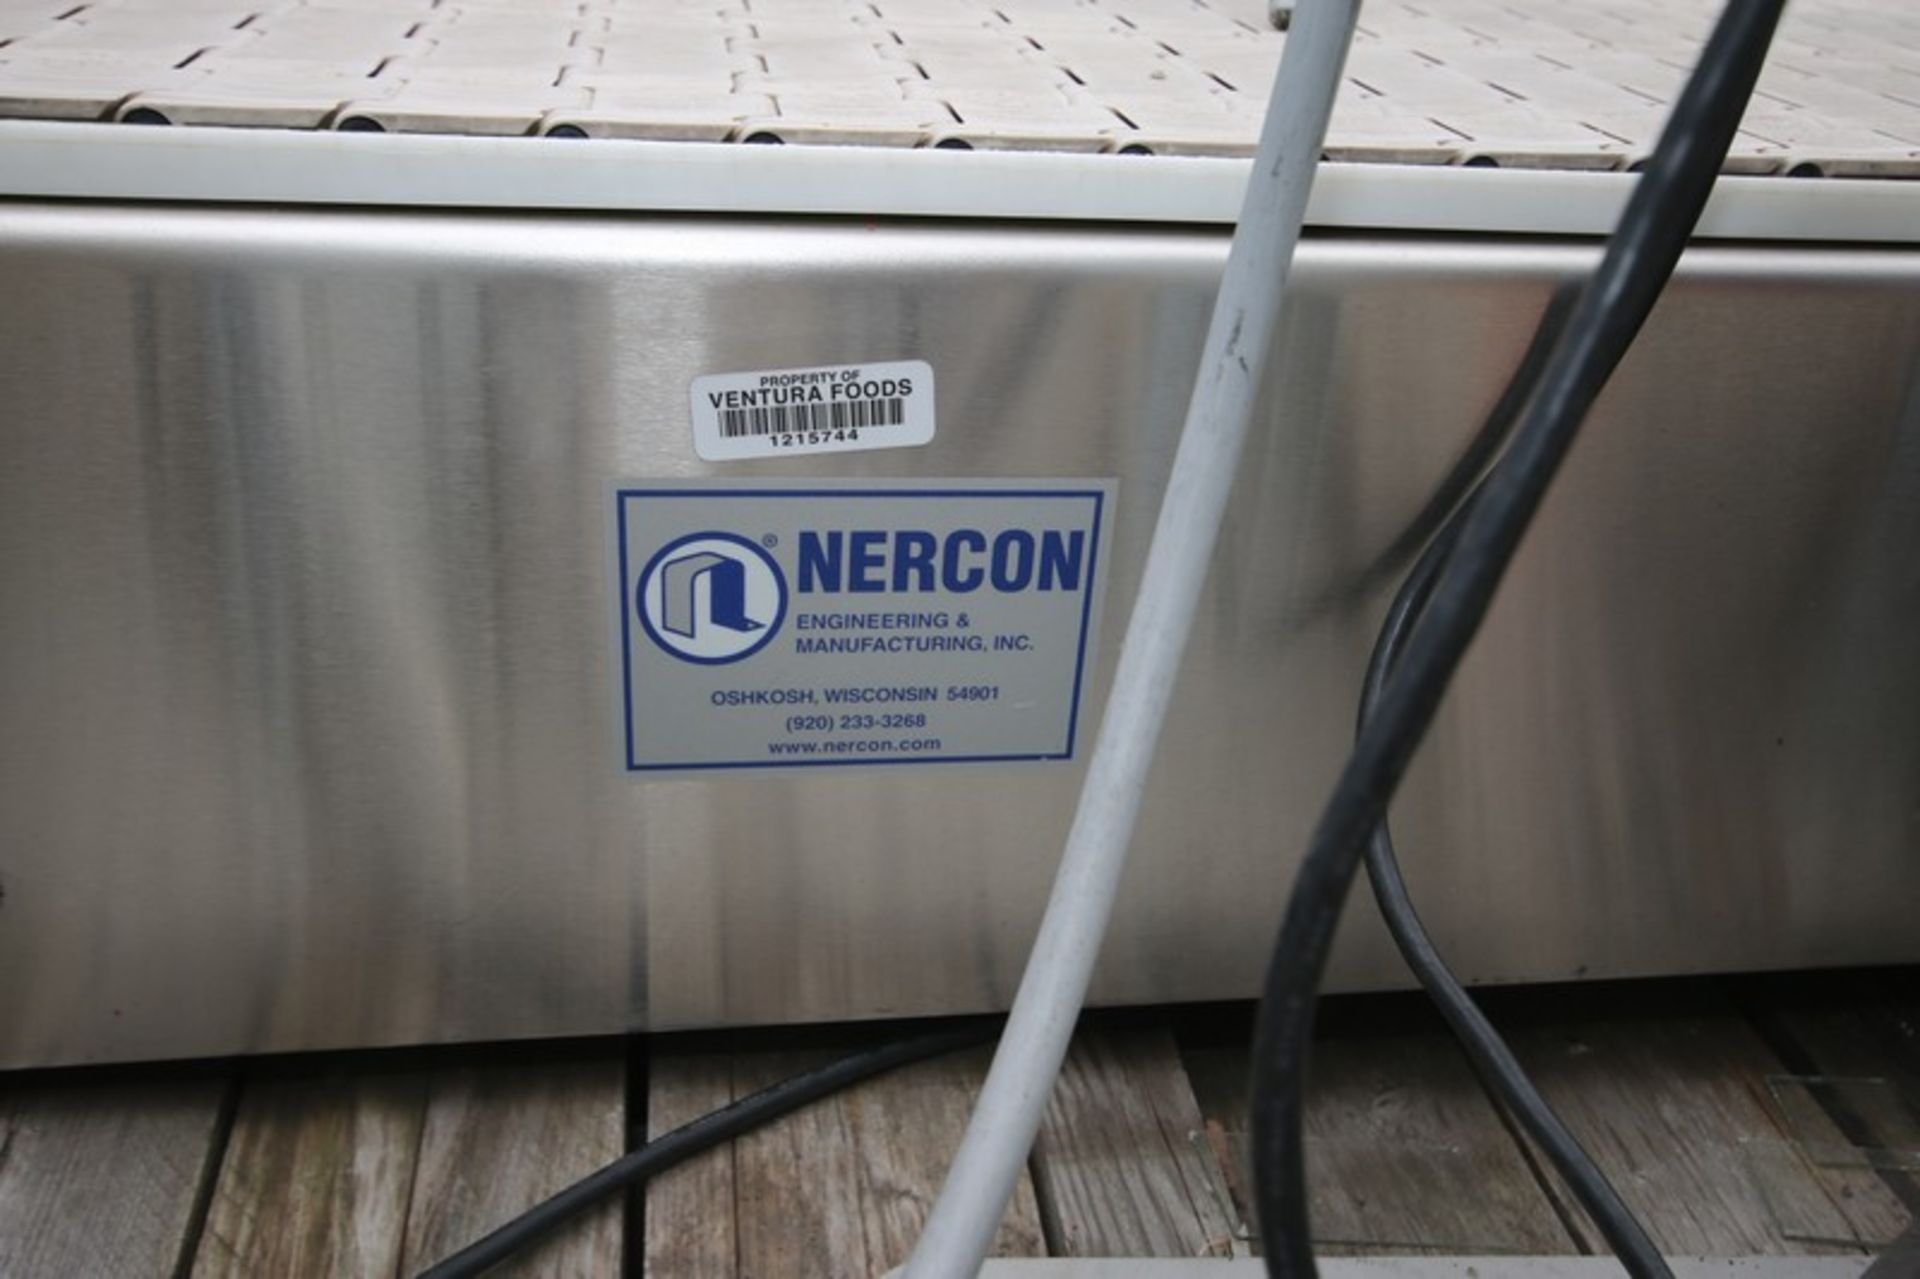 Nercon 8' L x 54" W S/S Conveyor Switch with Plastic Rex Type Belt, Baldor 1 hp/1725 rpm Drive - Image 5 of 5